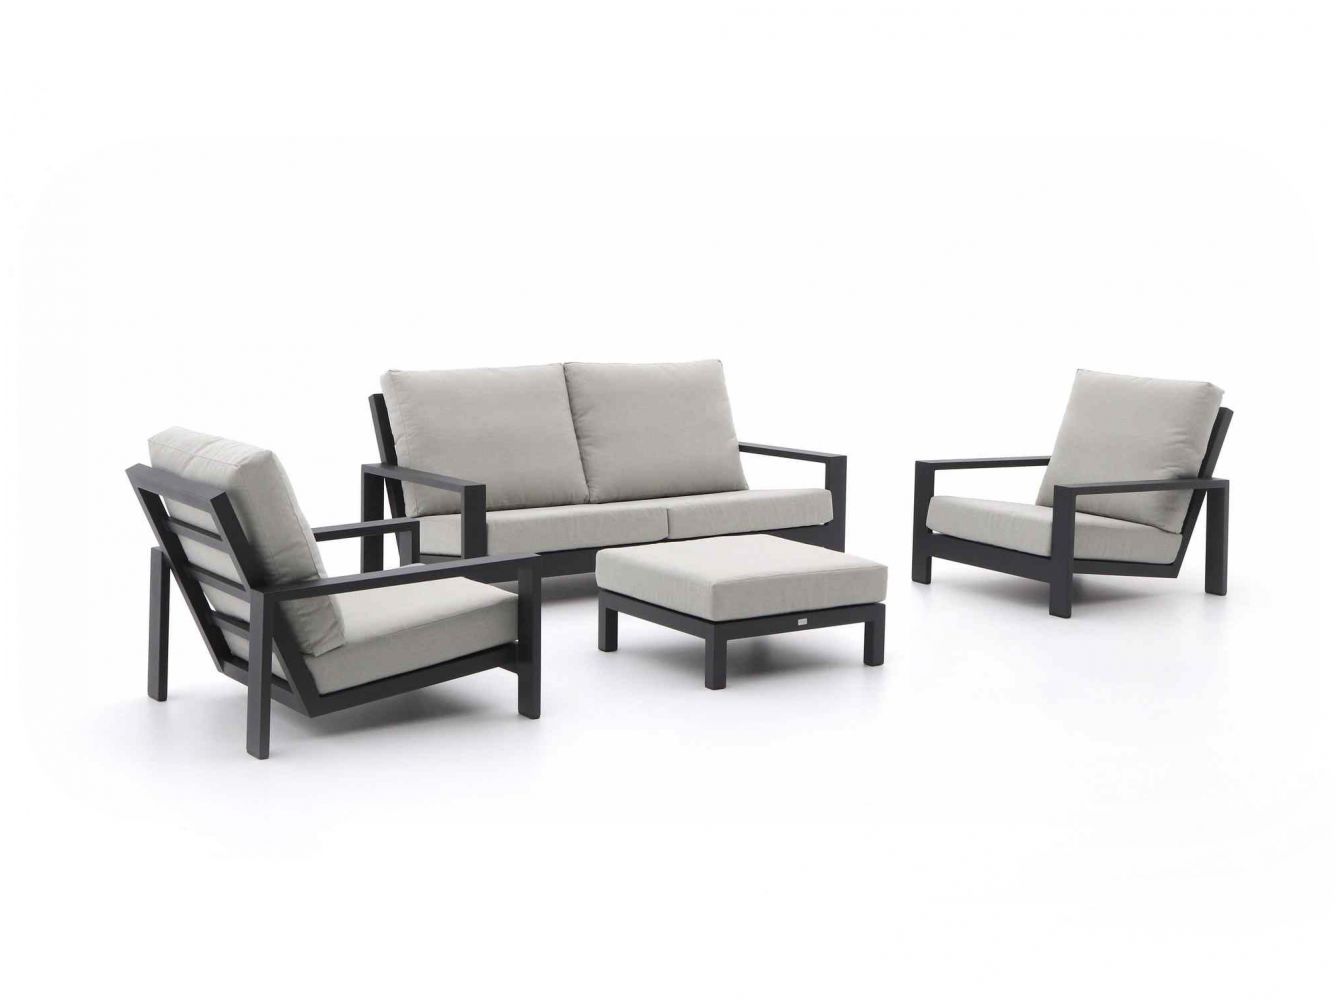 Vermindering melodie provincie Bellagio Vezzano stoel-bank loungeset 4-delig - Charcoal (incl. kussens) -  Kees Smit